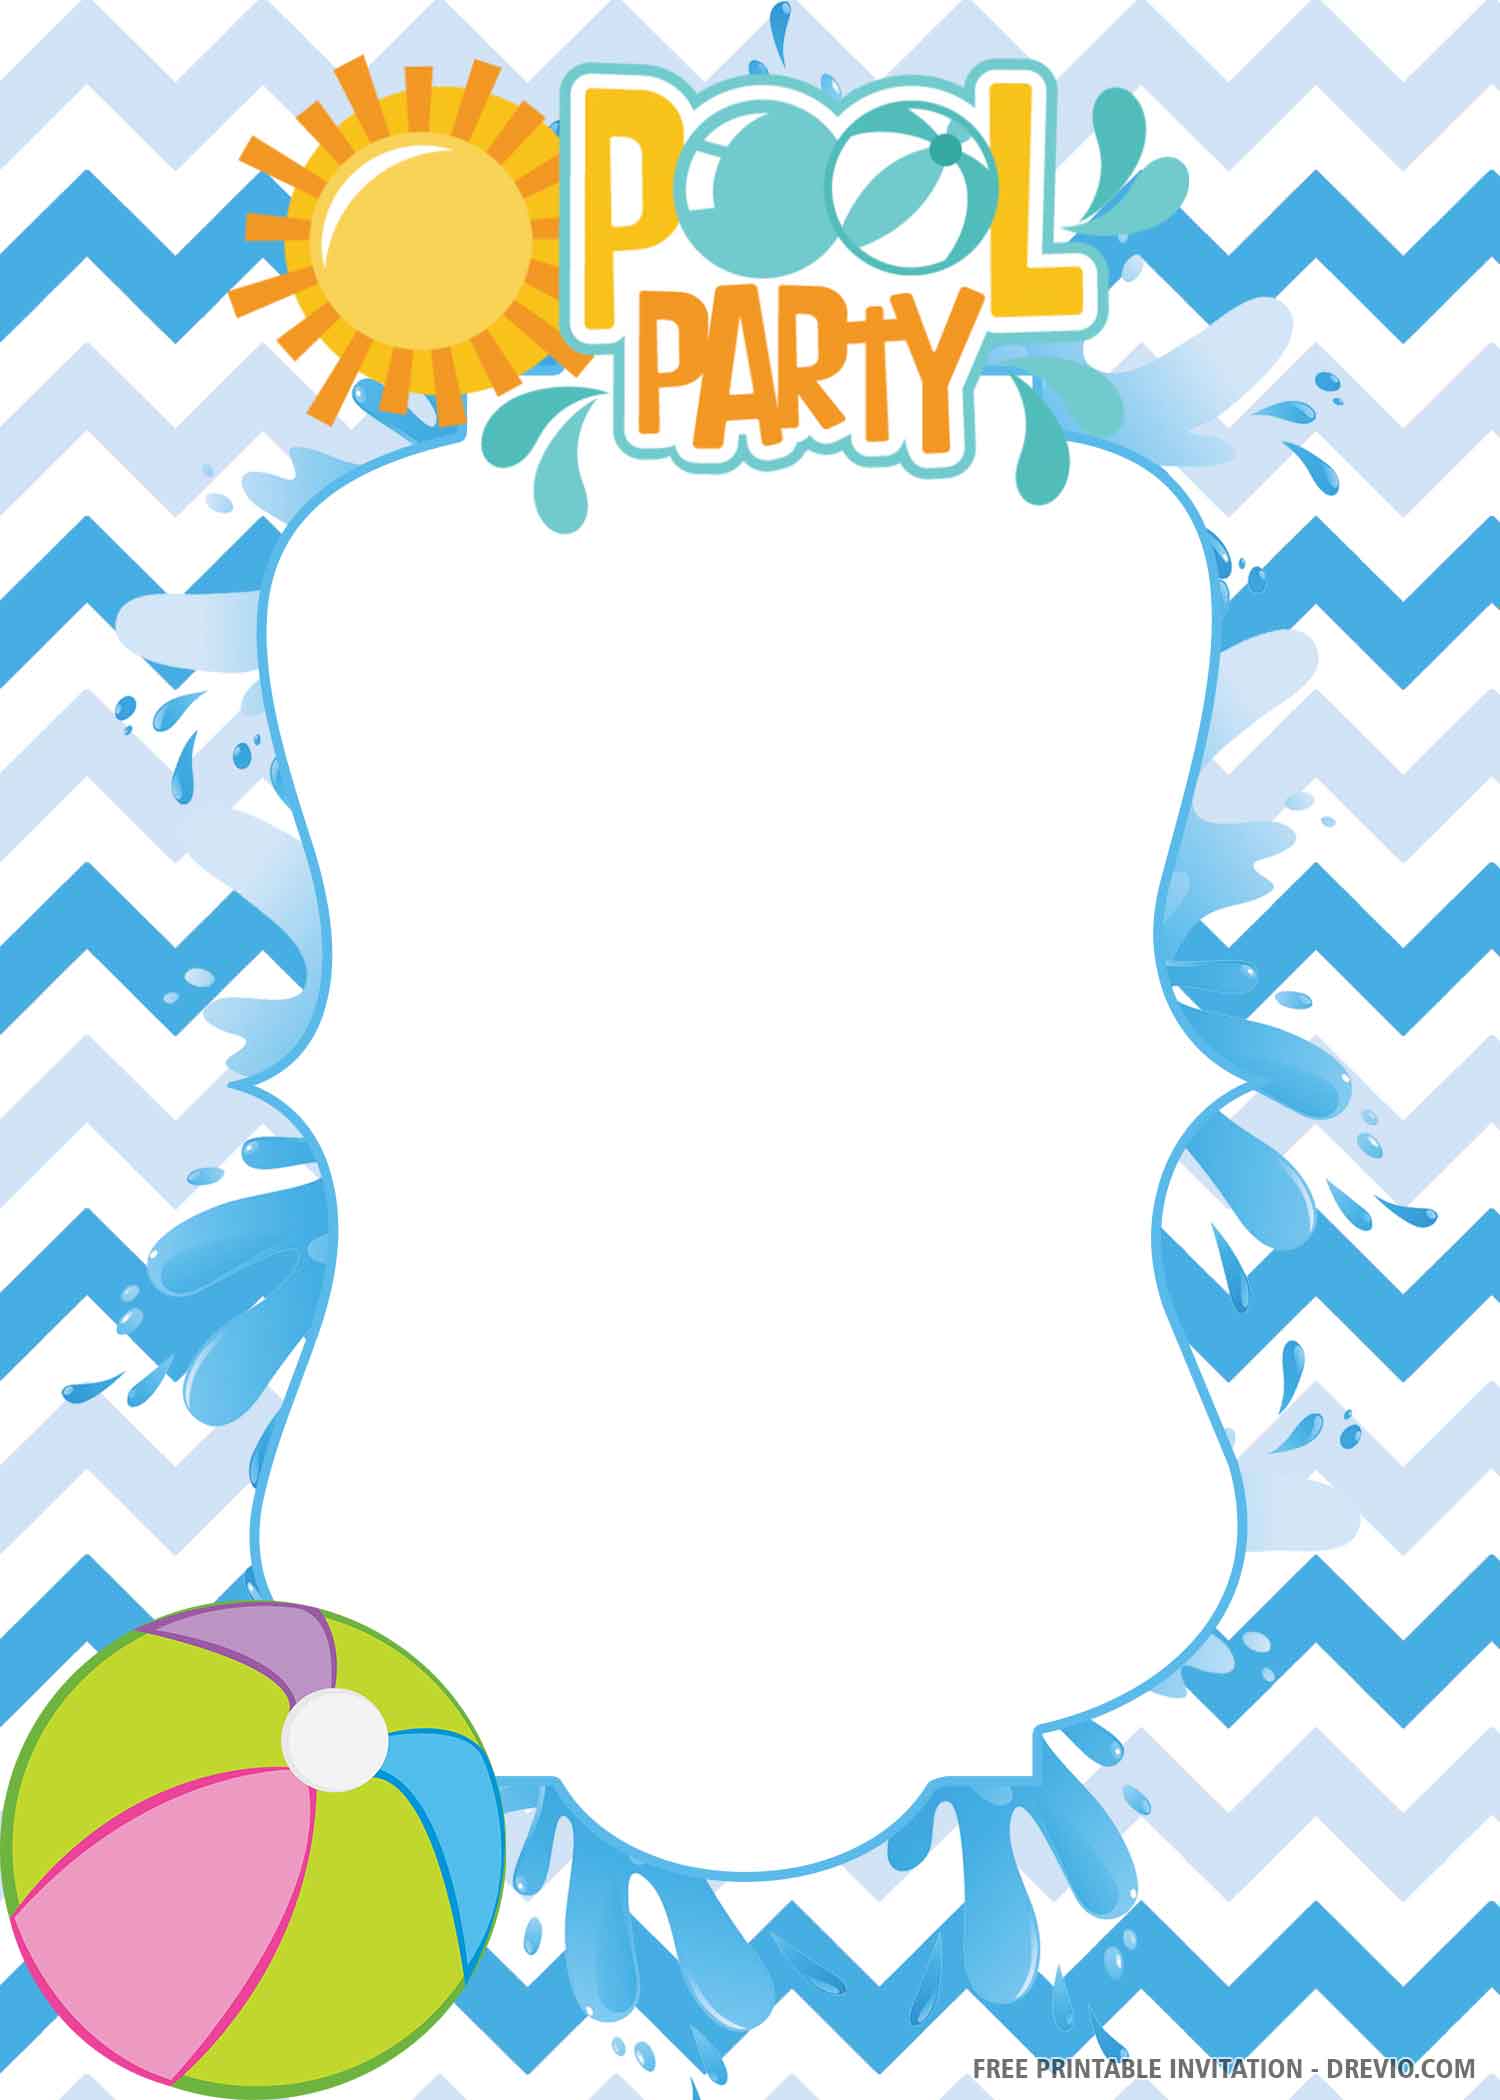 Blank Free Printable Pool Party Invitations Templates